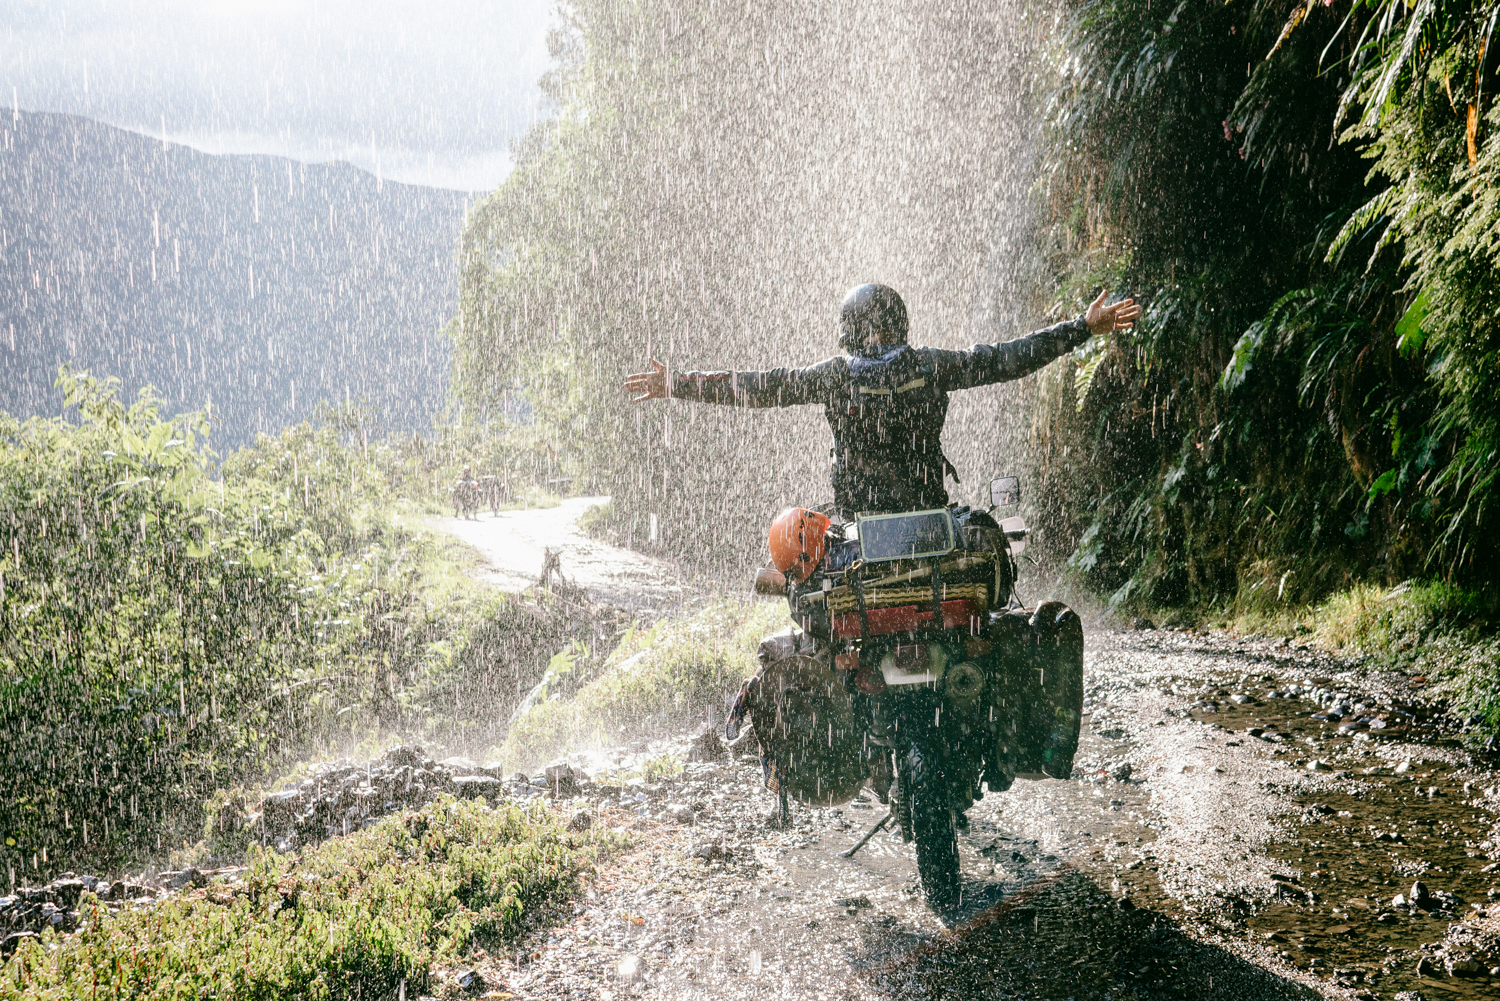 Motorcycle under a waterfall